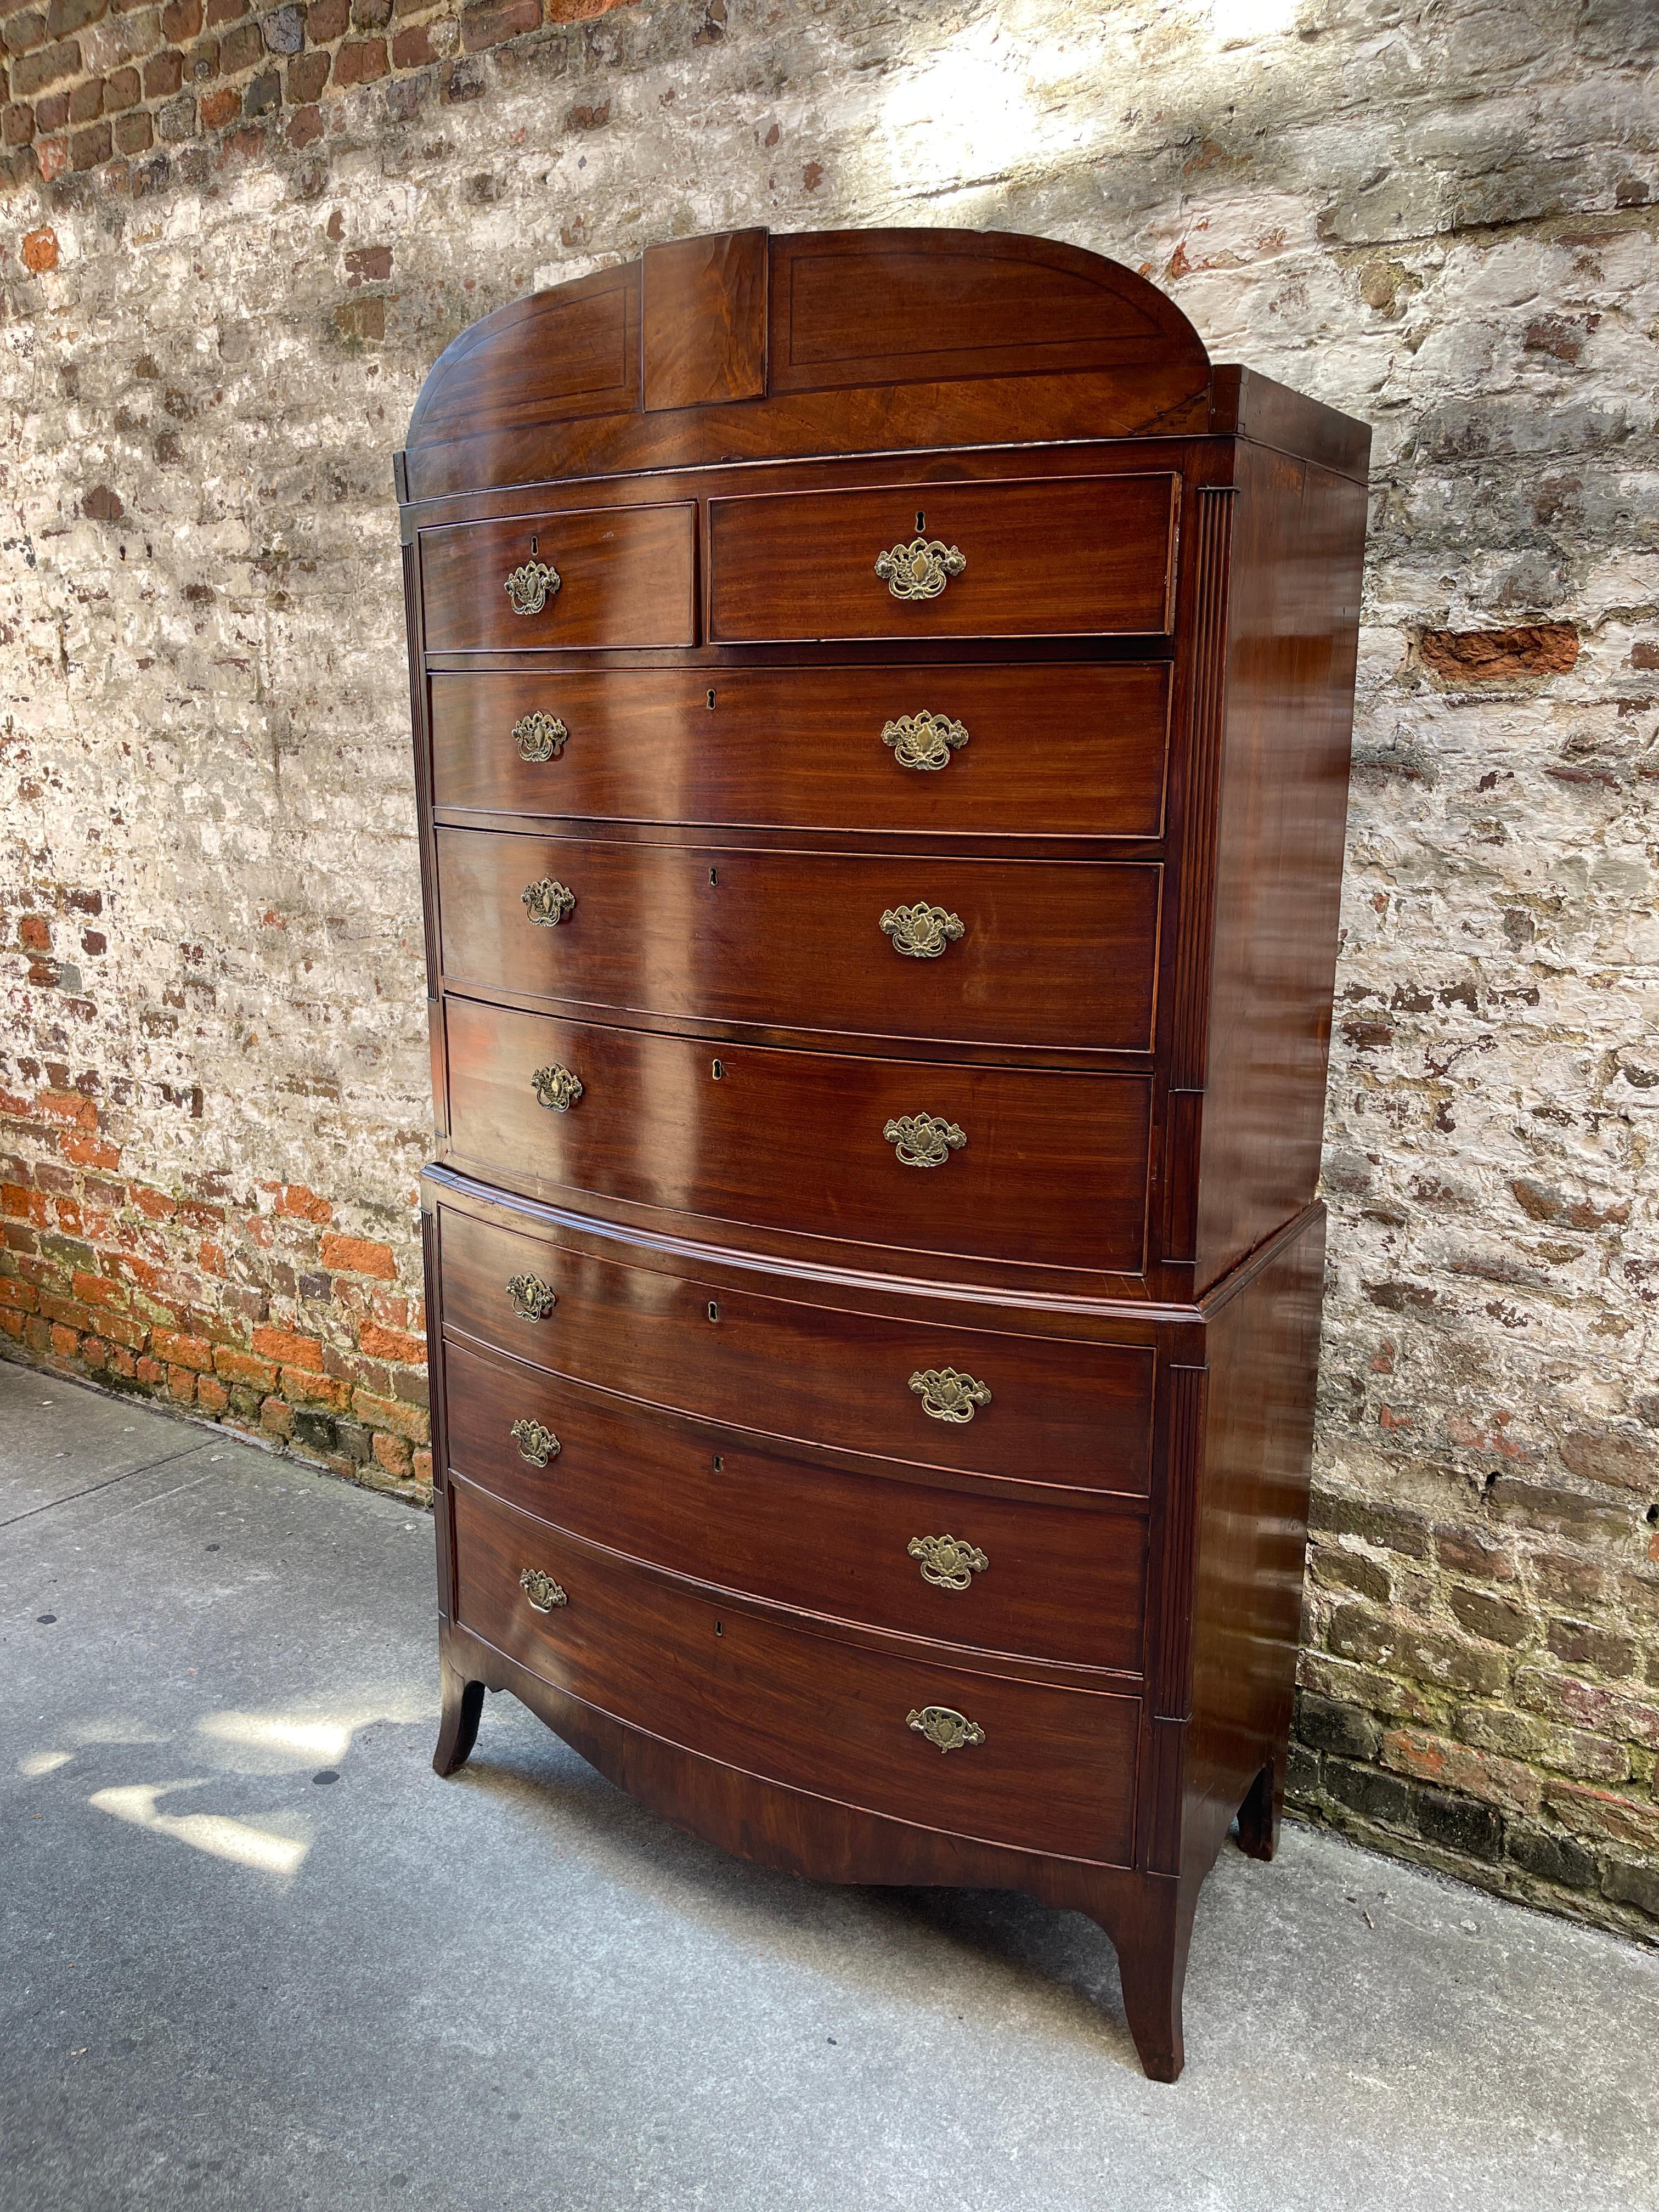 Mahogany bow front chest on chest early 19th century. 